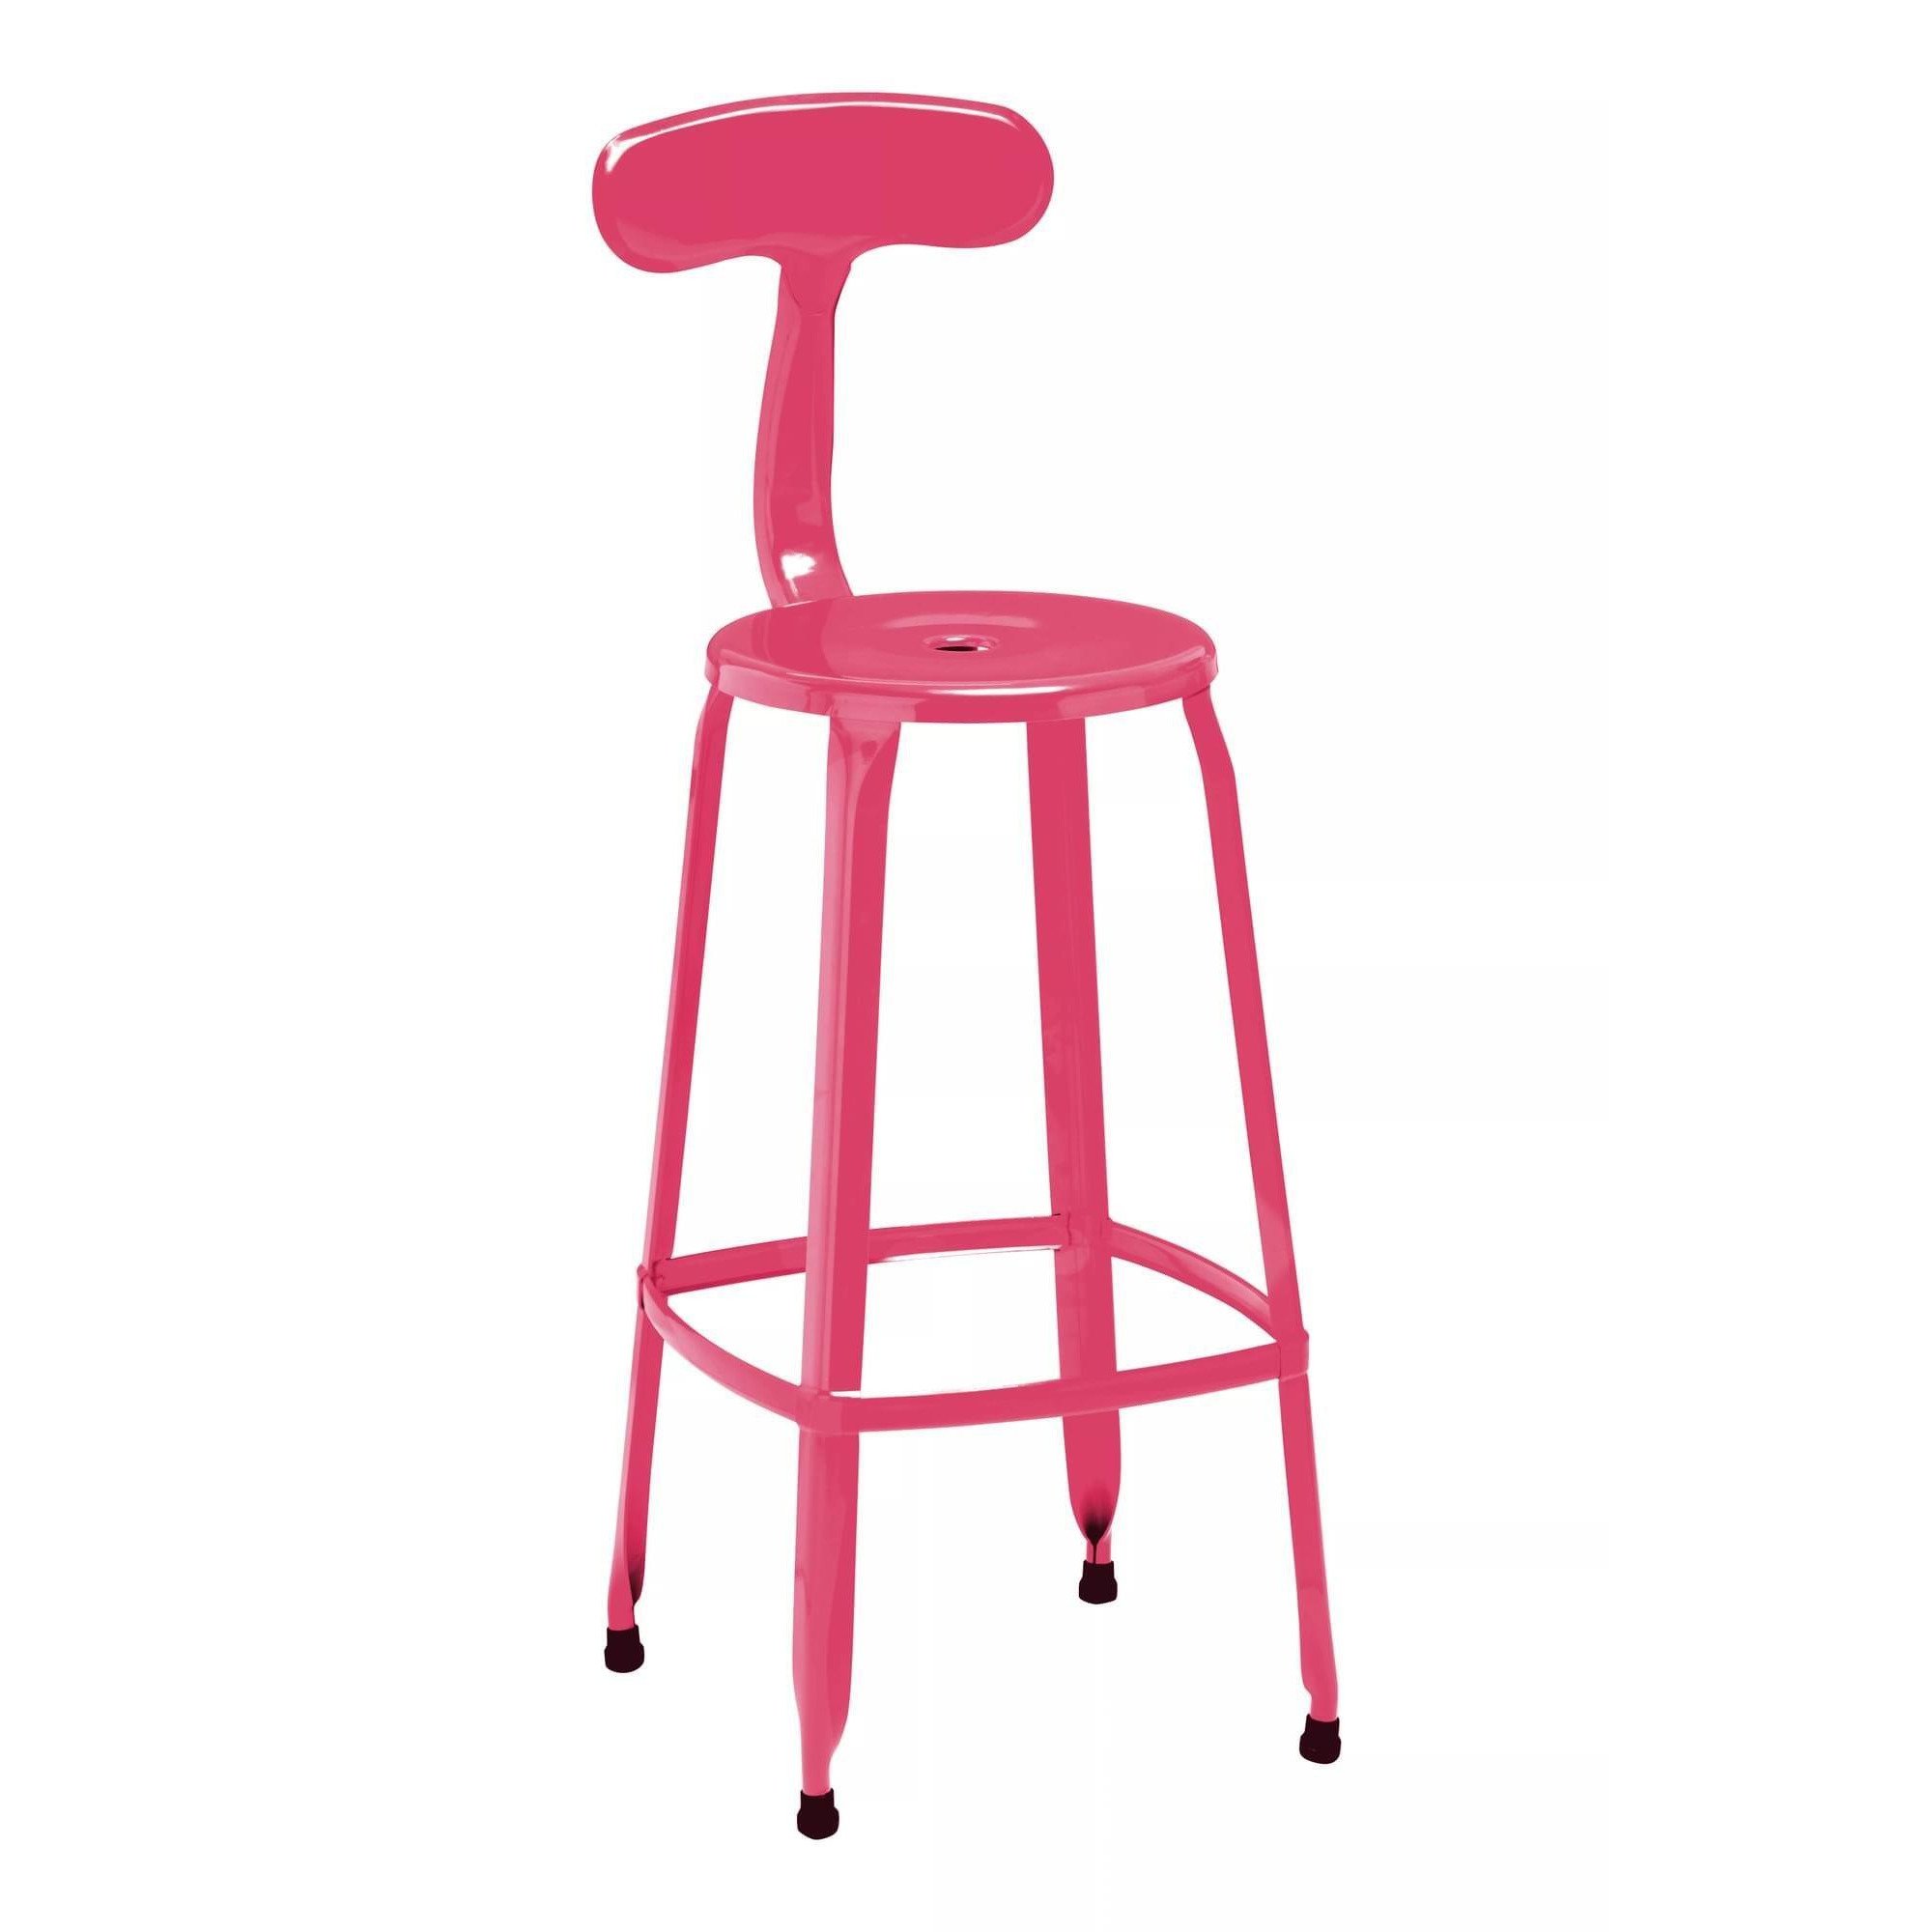 Interiors by Premier Hot Pink Disc Bar Chair - image 1